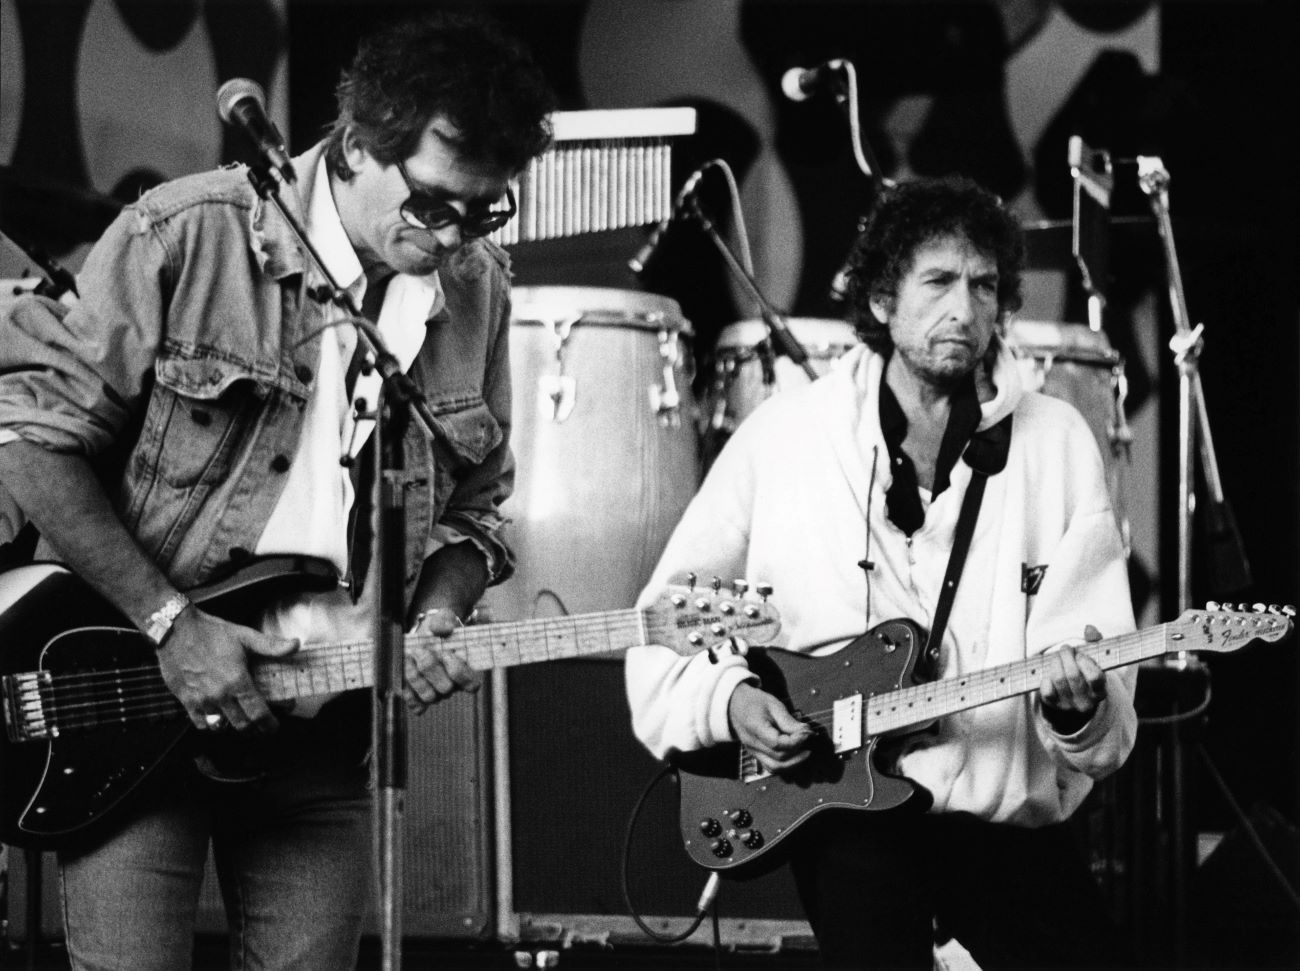 A black and white picture of Keith Richards and Bob Dylan playing guitar together on stage.